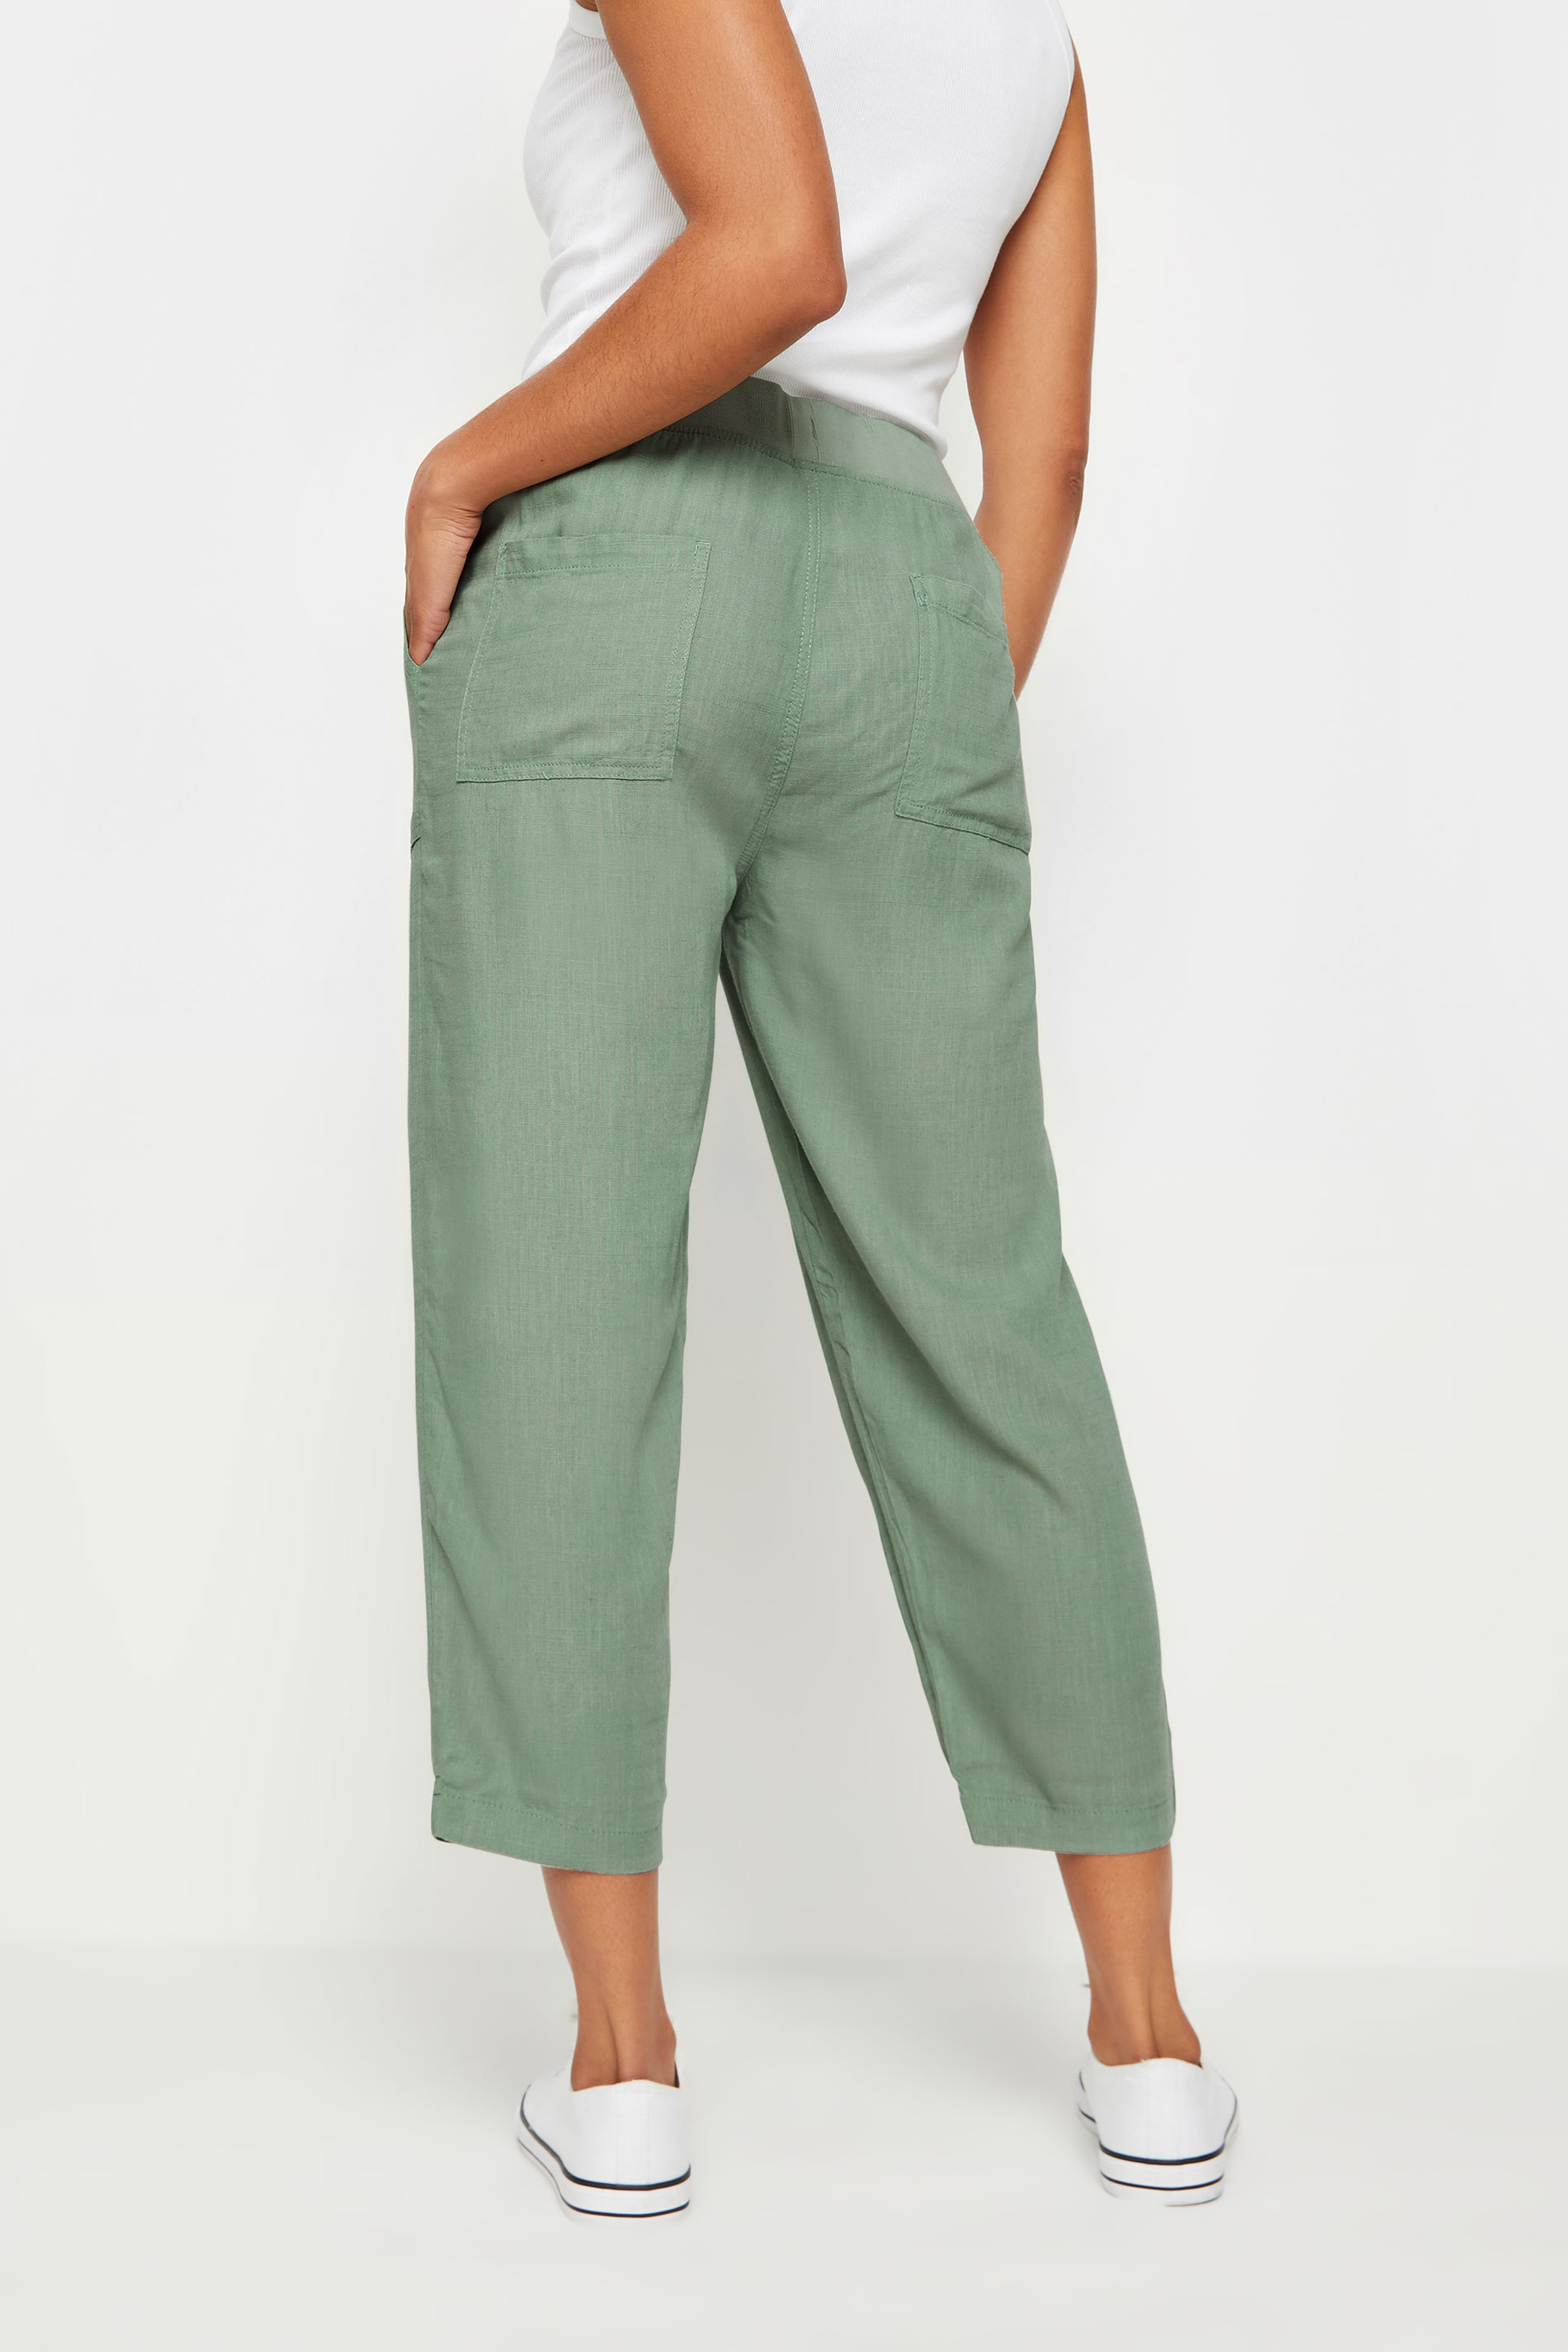 M&Co Sage Green Linen Cropped Joggers | M&Co 3